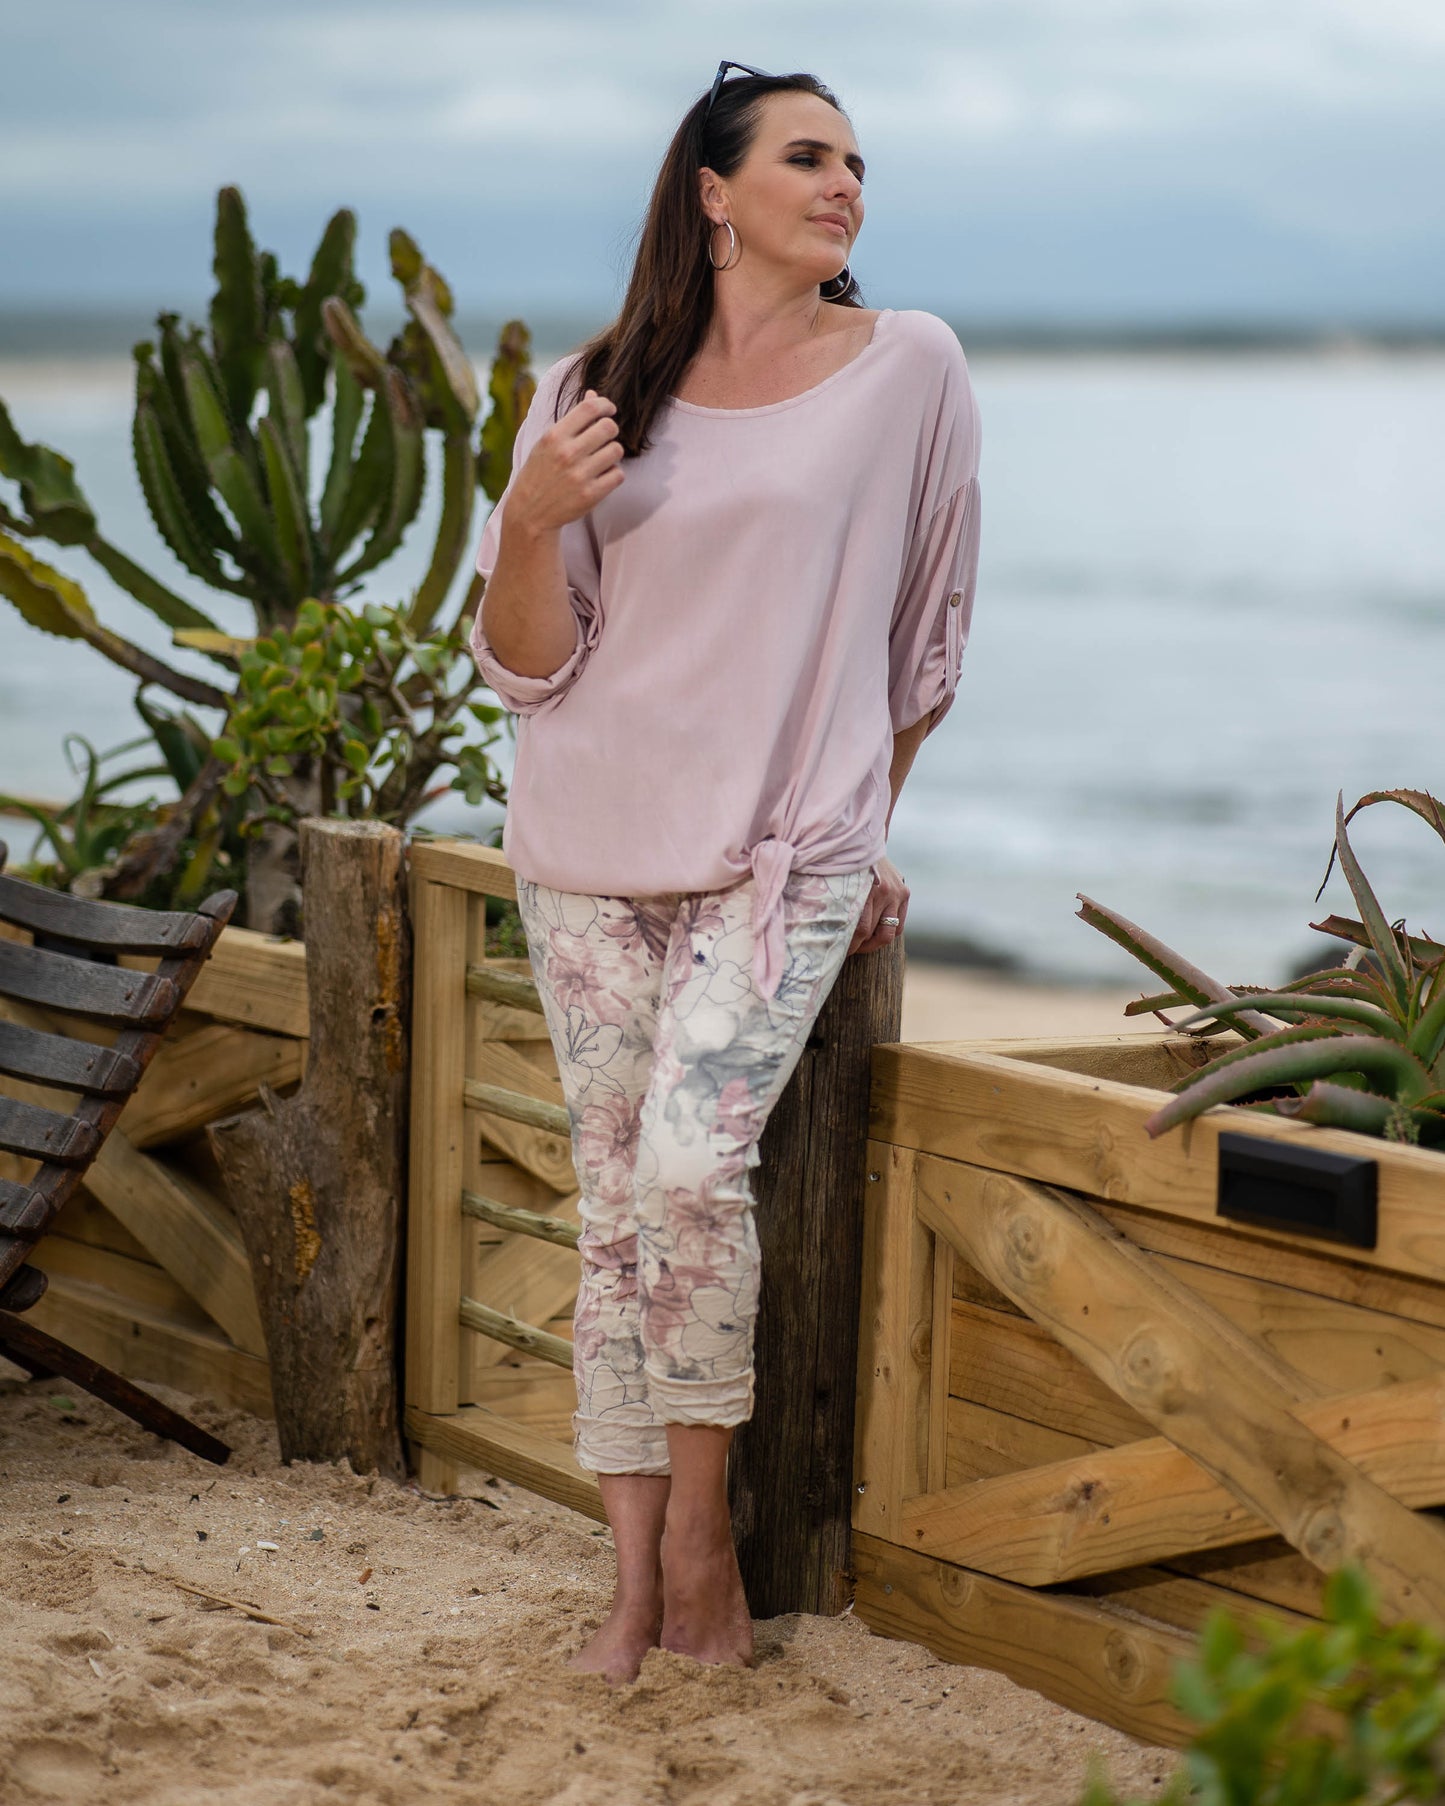 The batwing cut offers a relaxed and airy silhouette, ensuring a comfortable fit while adding a touch of contemporary flair. The round neck enhances the casual charm of the top. The unique front twist not only introduces a touch of creativity but also creates a flattering drape, enhancing the overall visual appeal